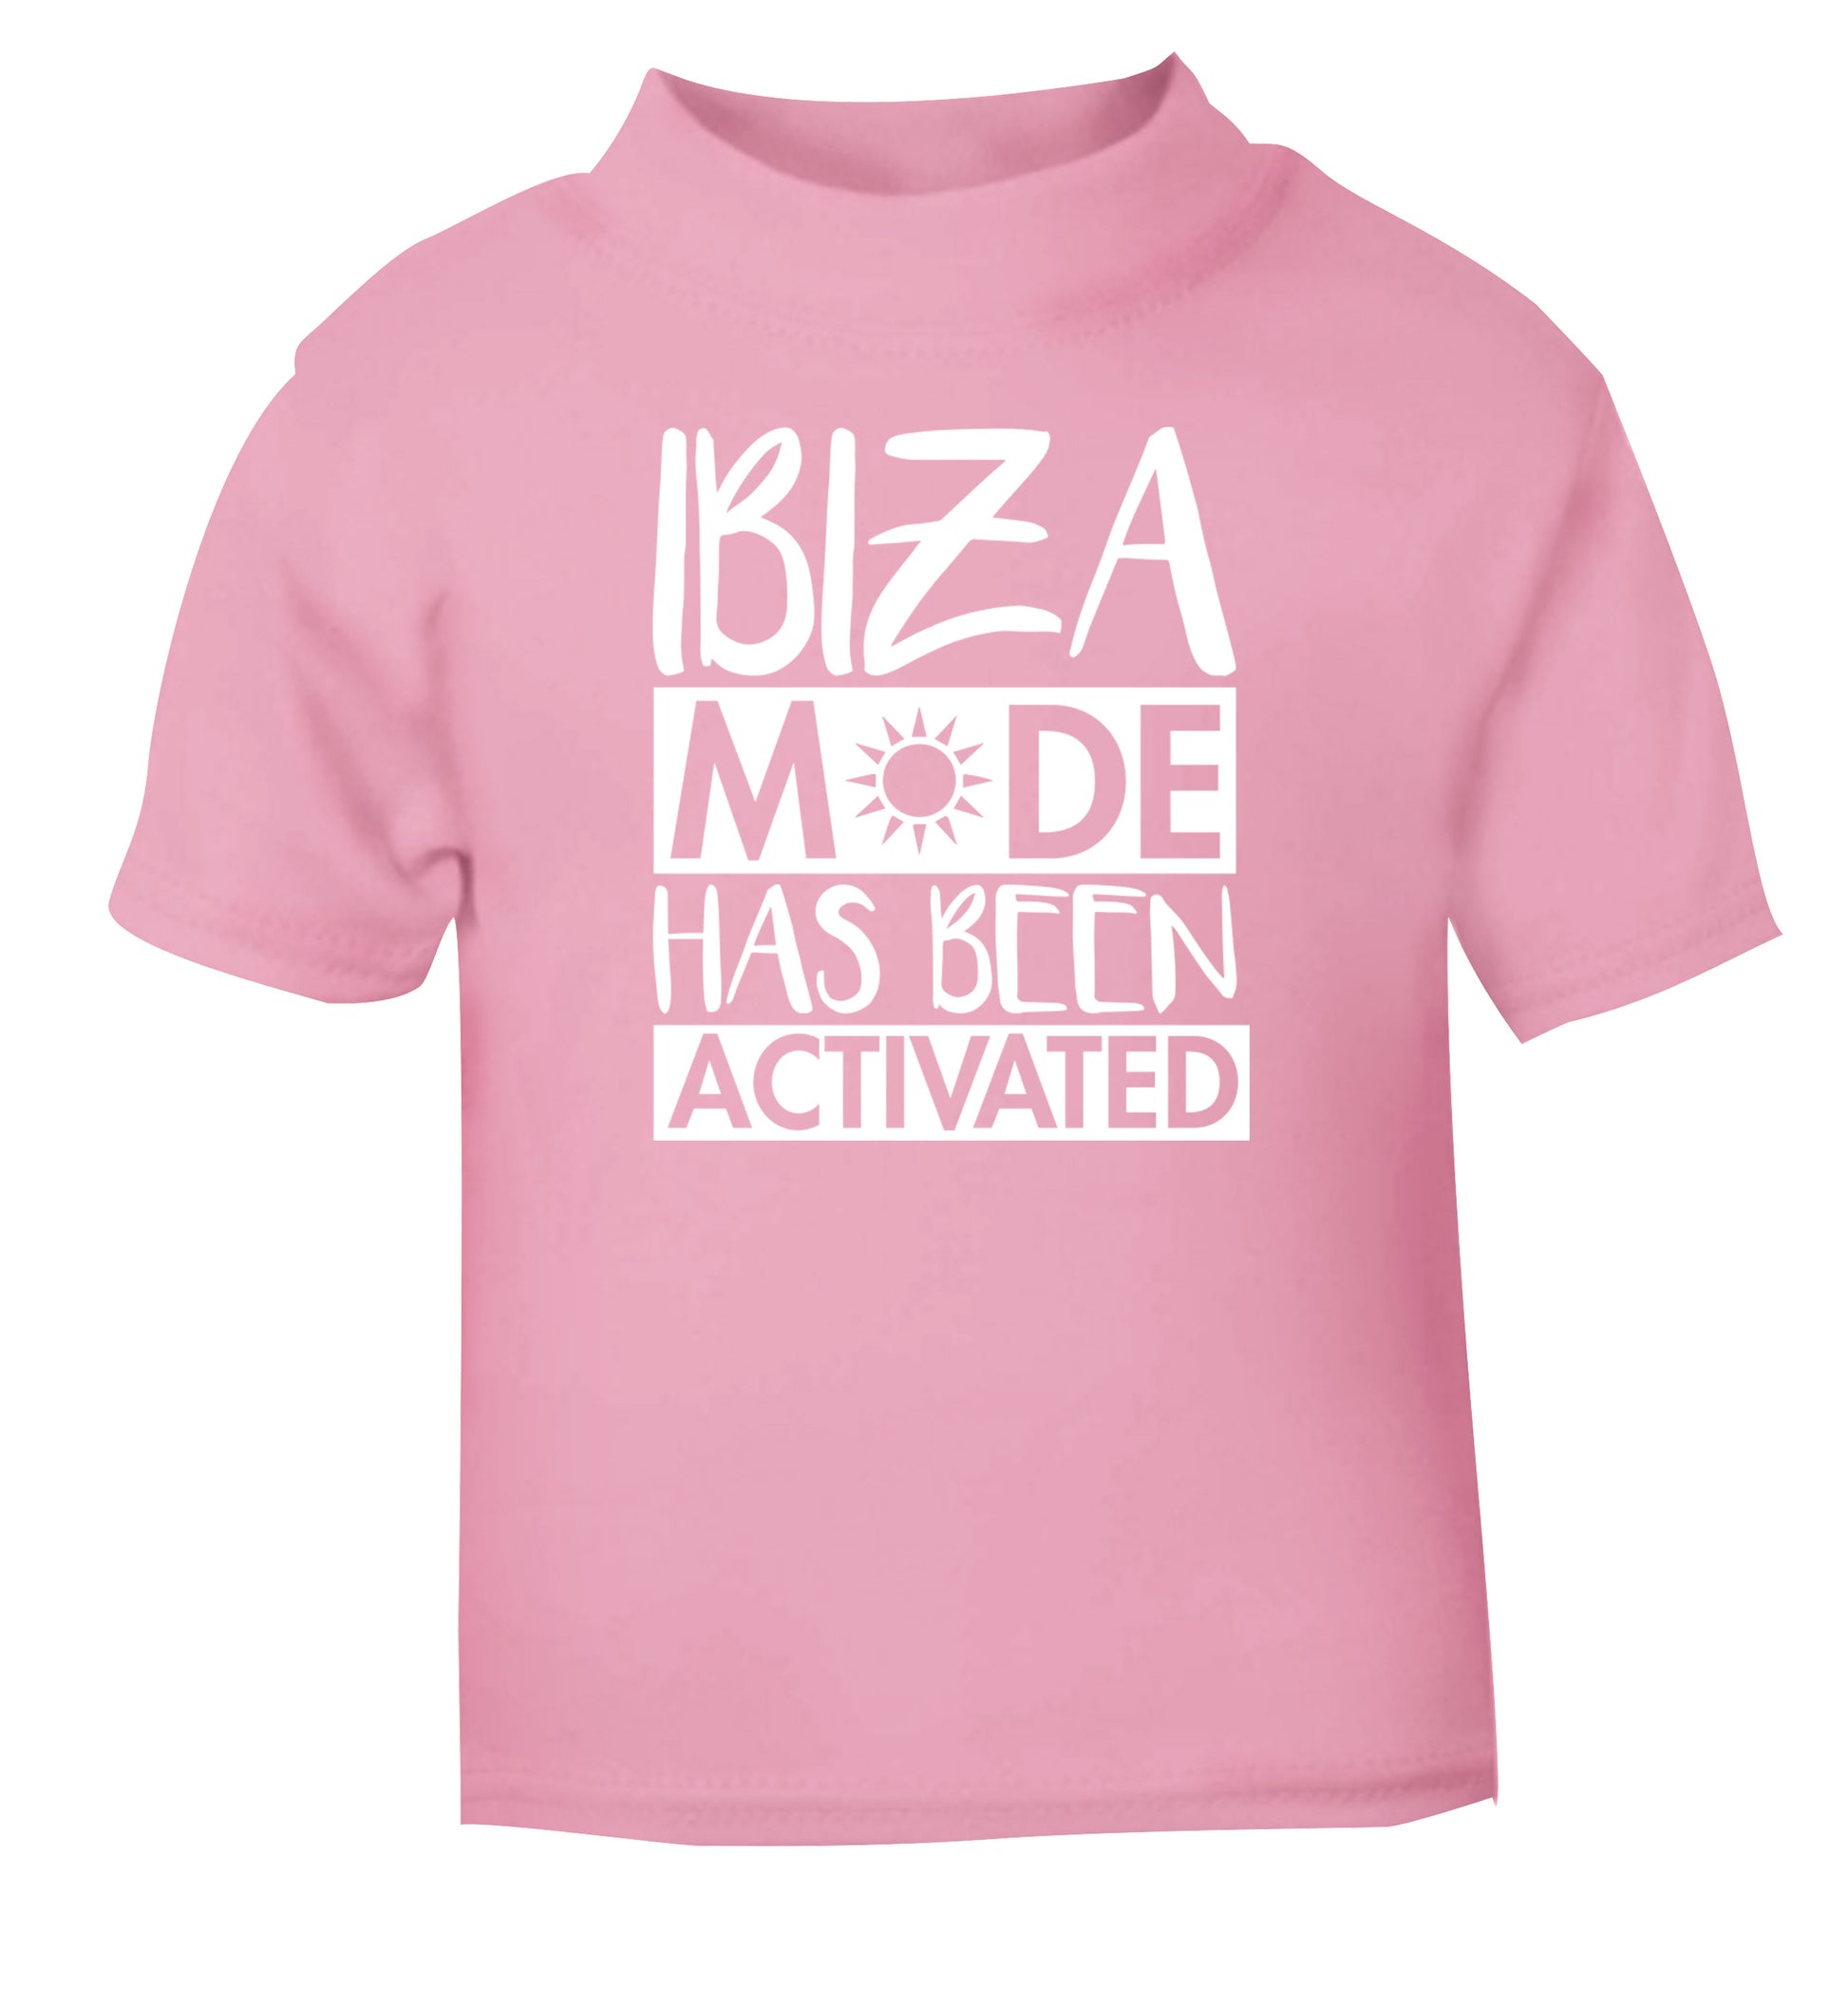 Ibiza mode has been activated light pink Baby Toddler Tshirt 2 Years